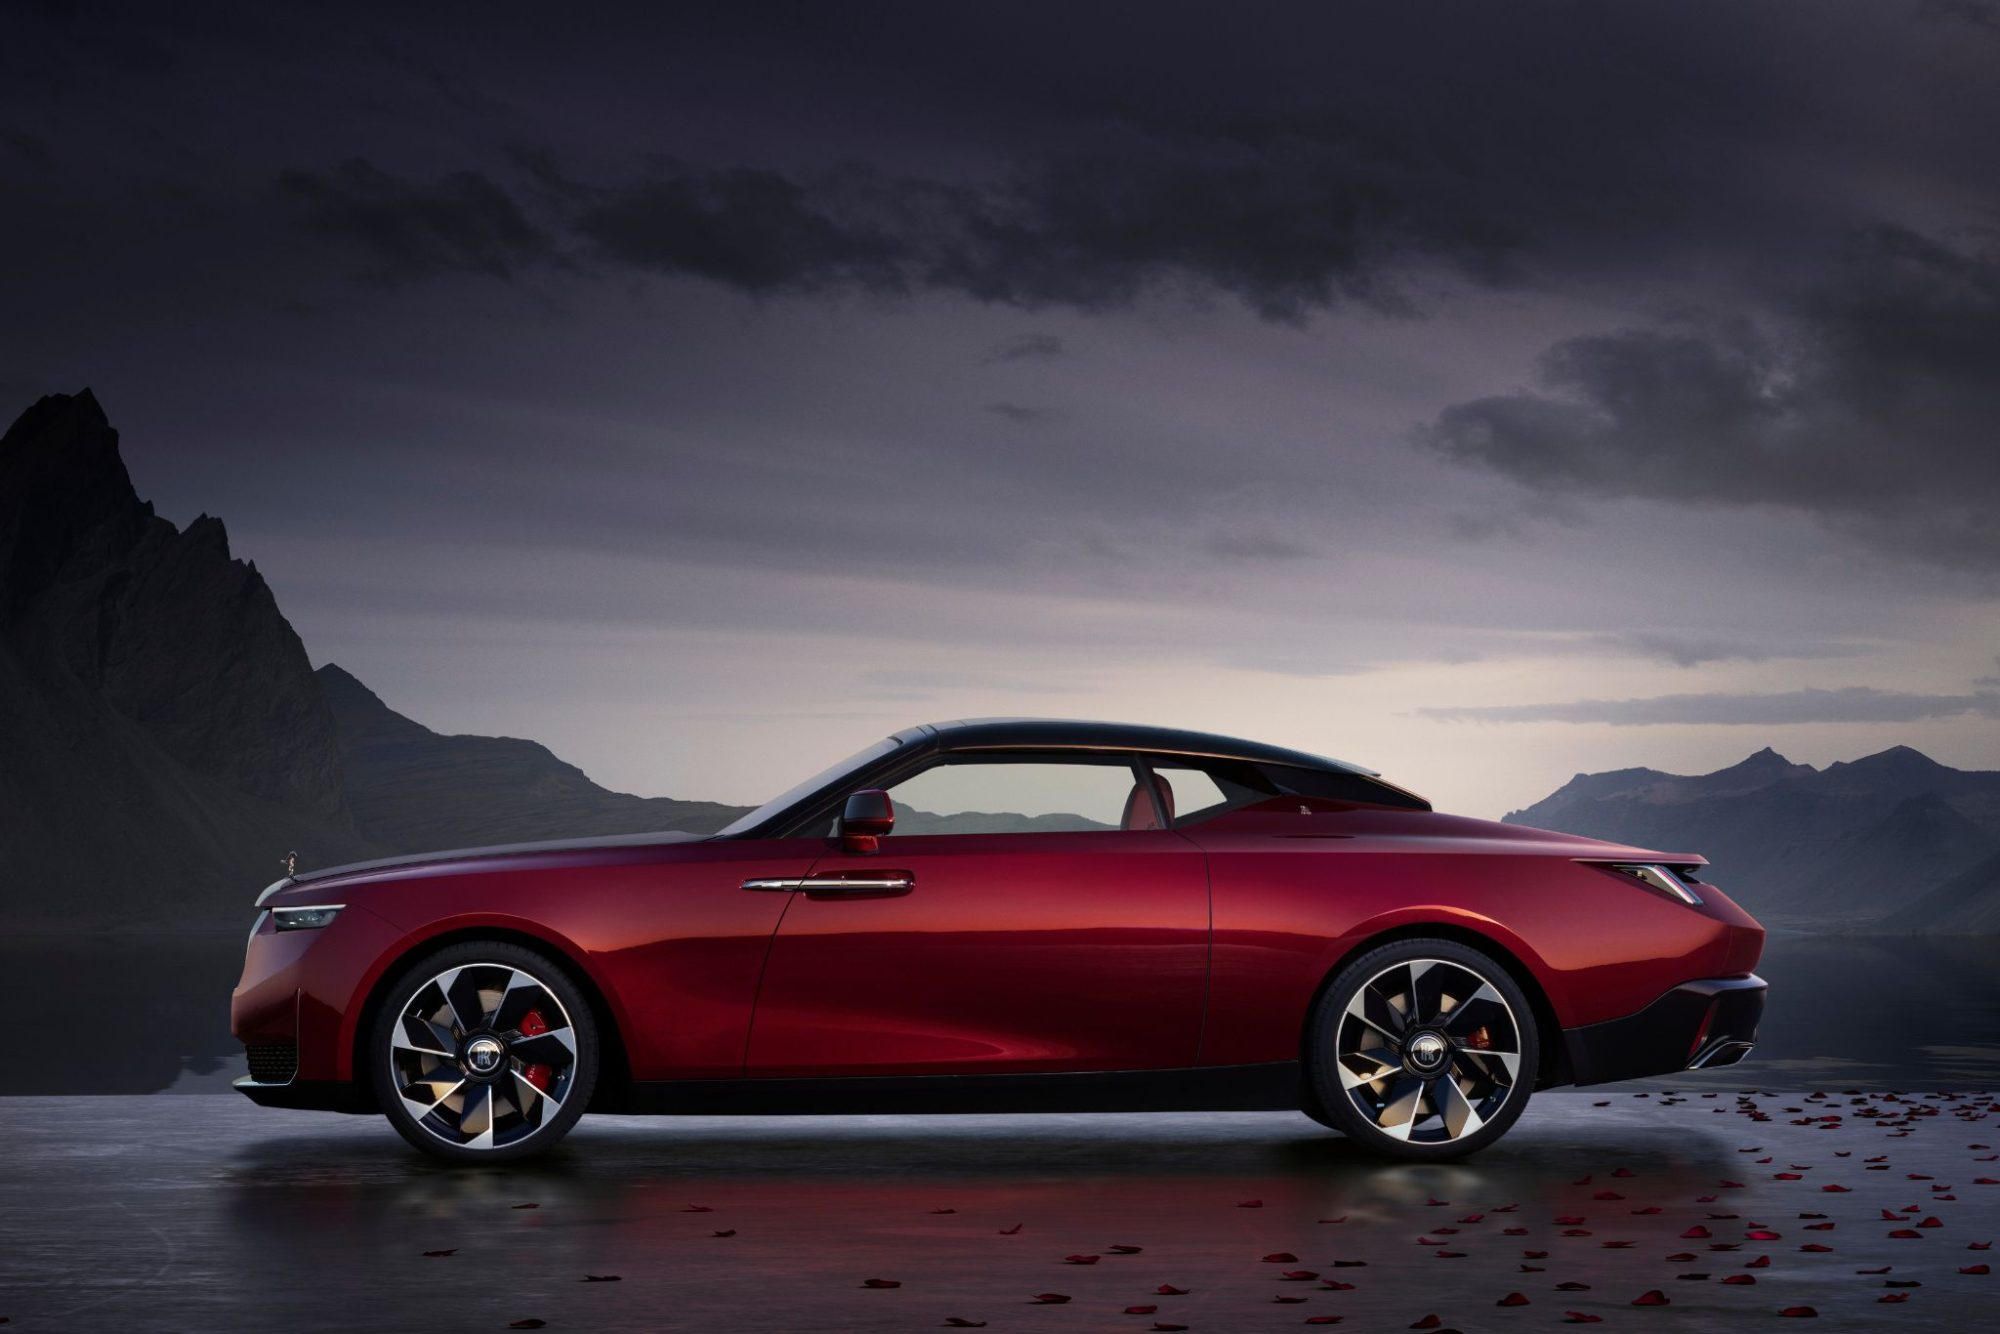 Rolls-Royce’s La Rose Noire Droptail is inspired by romance and the allure of the Black Baccara rose